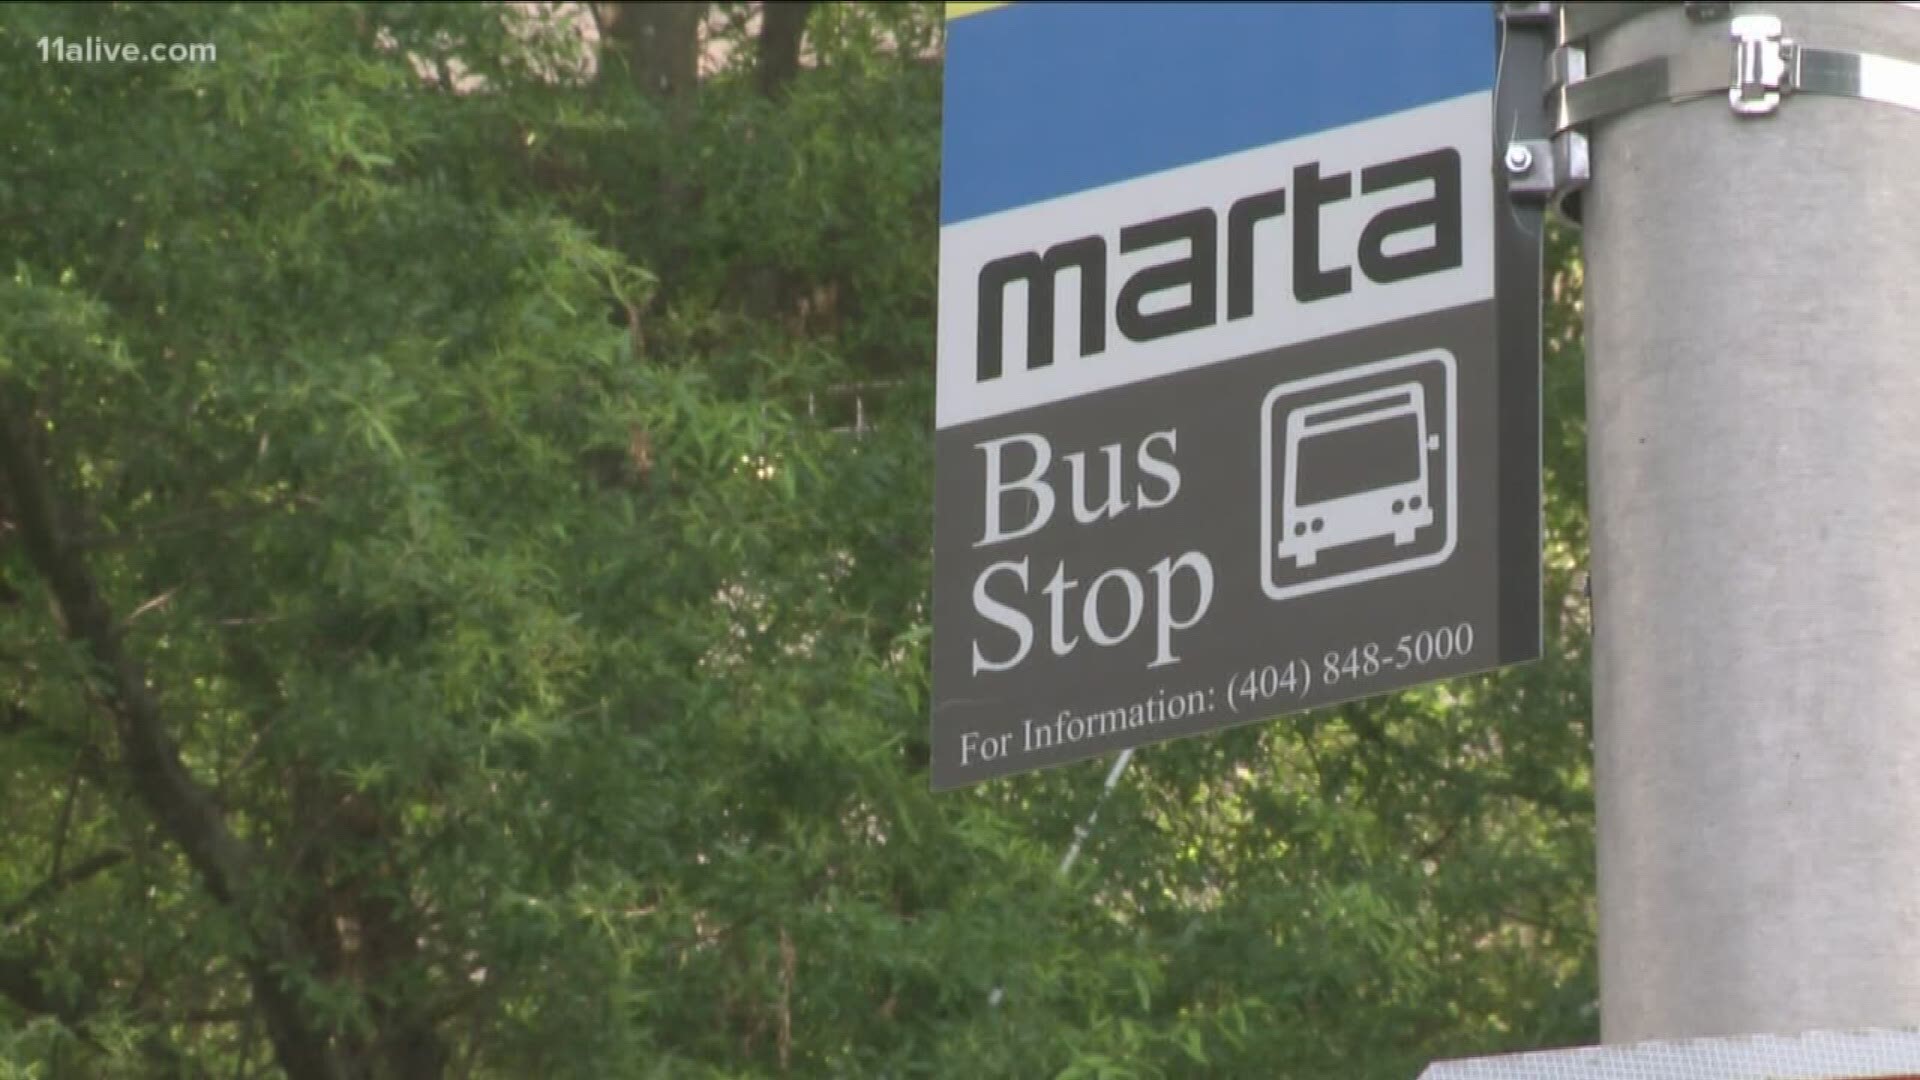 Another company is moving its office to a MARTA friendly location.